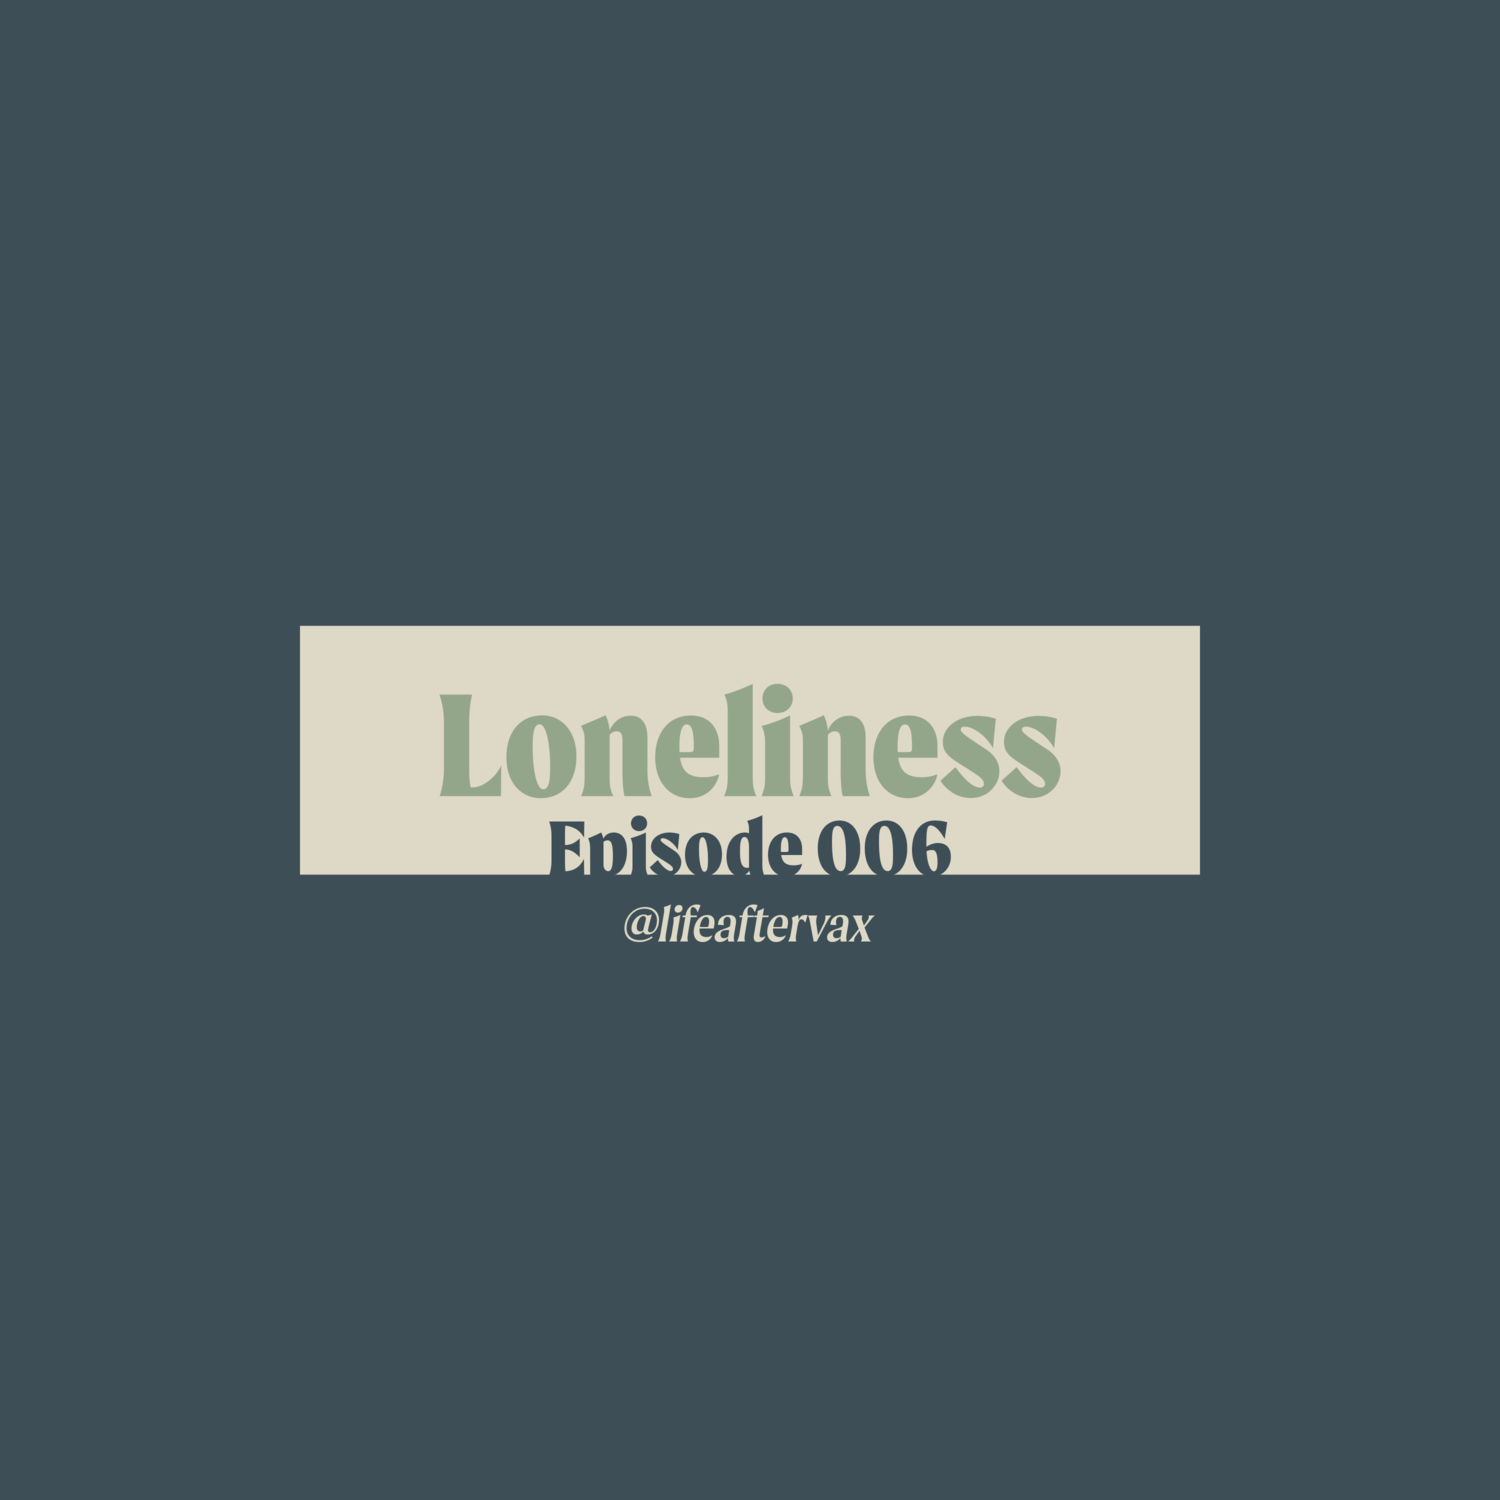 Episode 006 - Loneliness